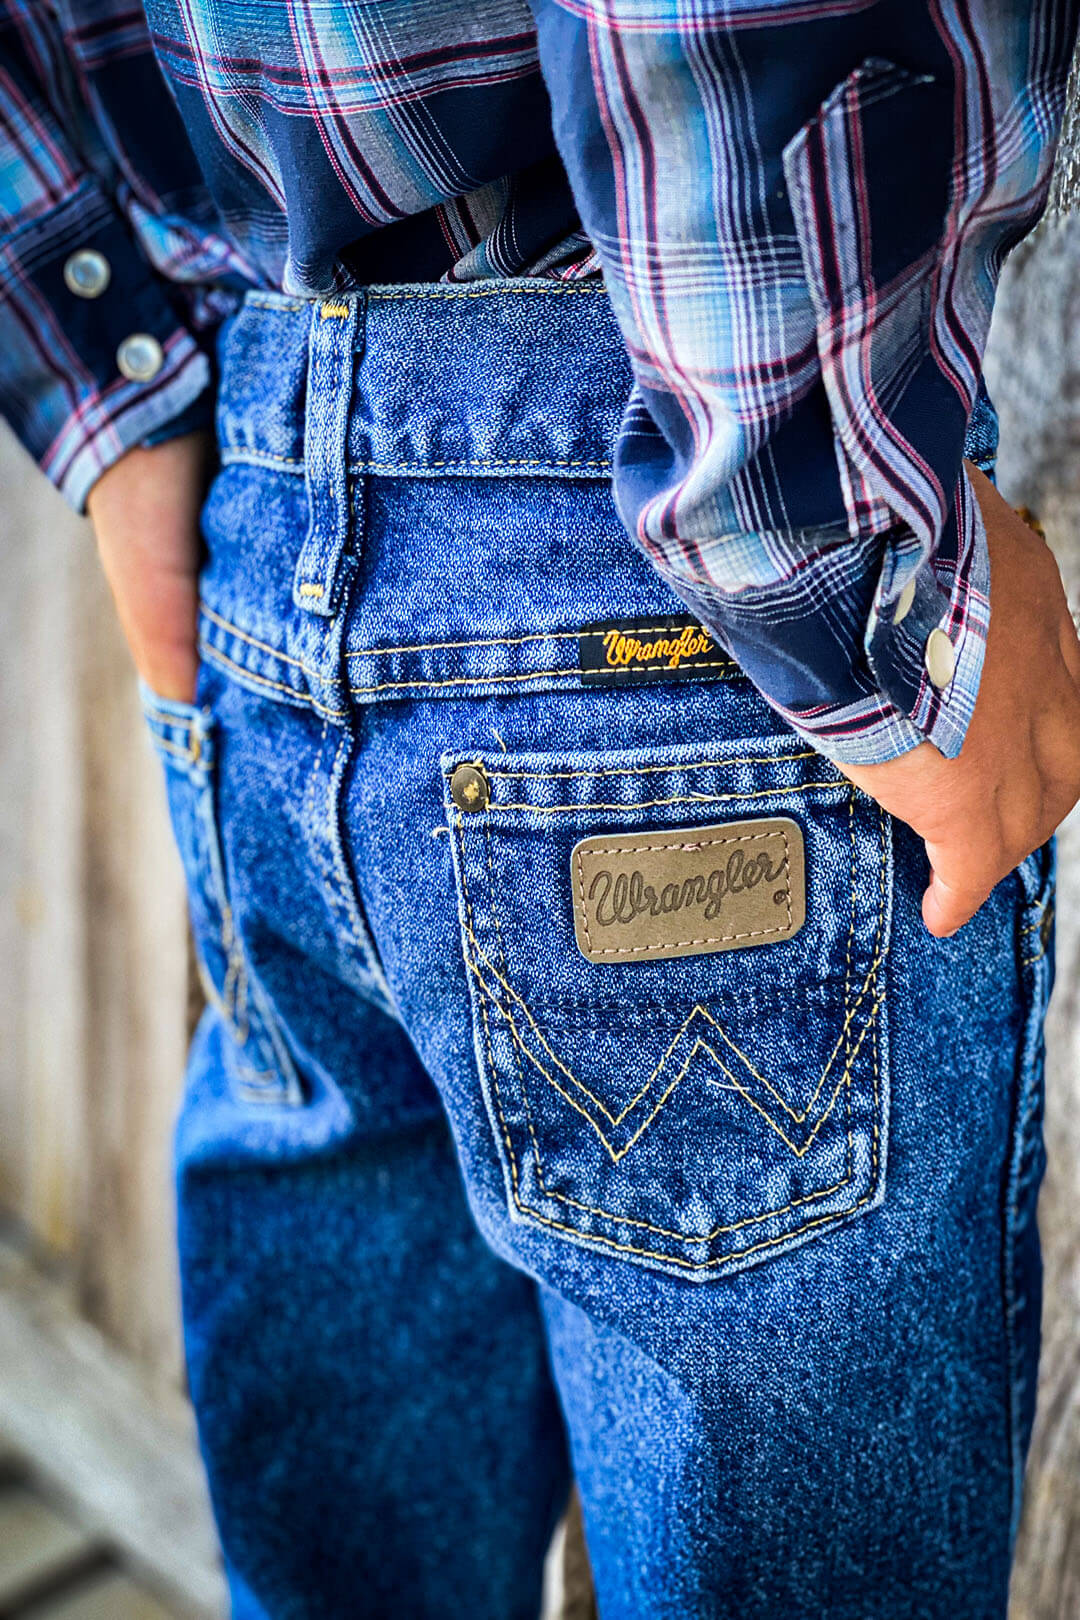 Picture showing back of the wrangler george straight boy jeans with wrangler emblem on back pocket.